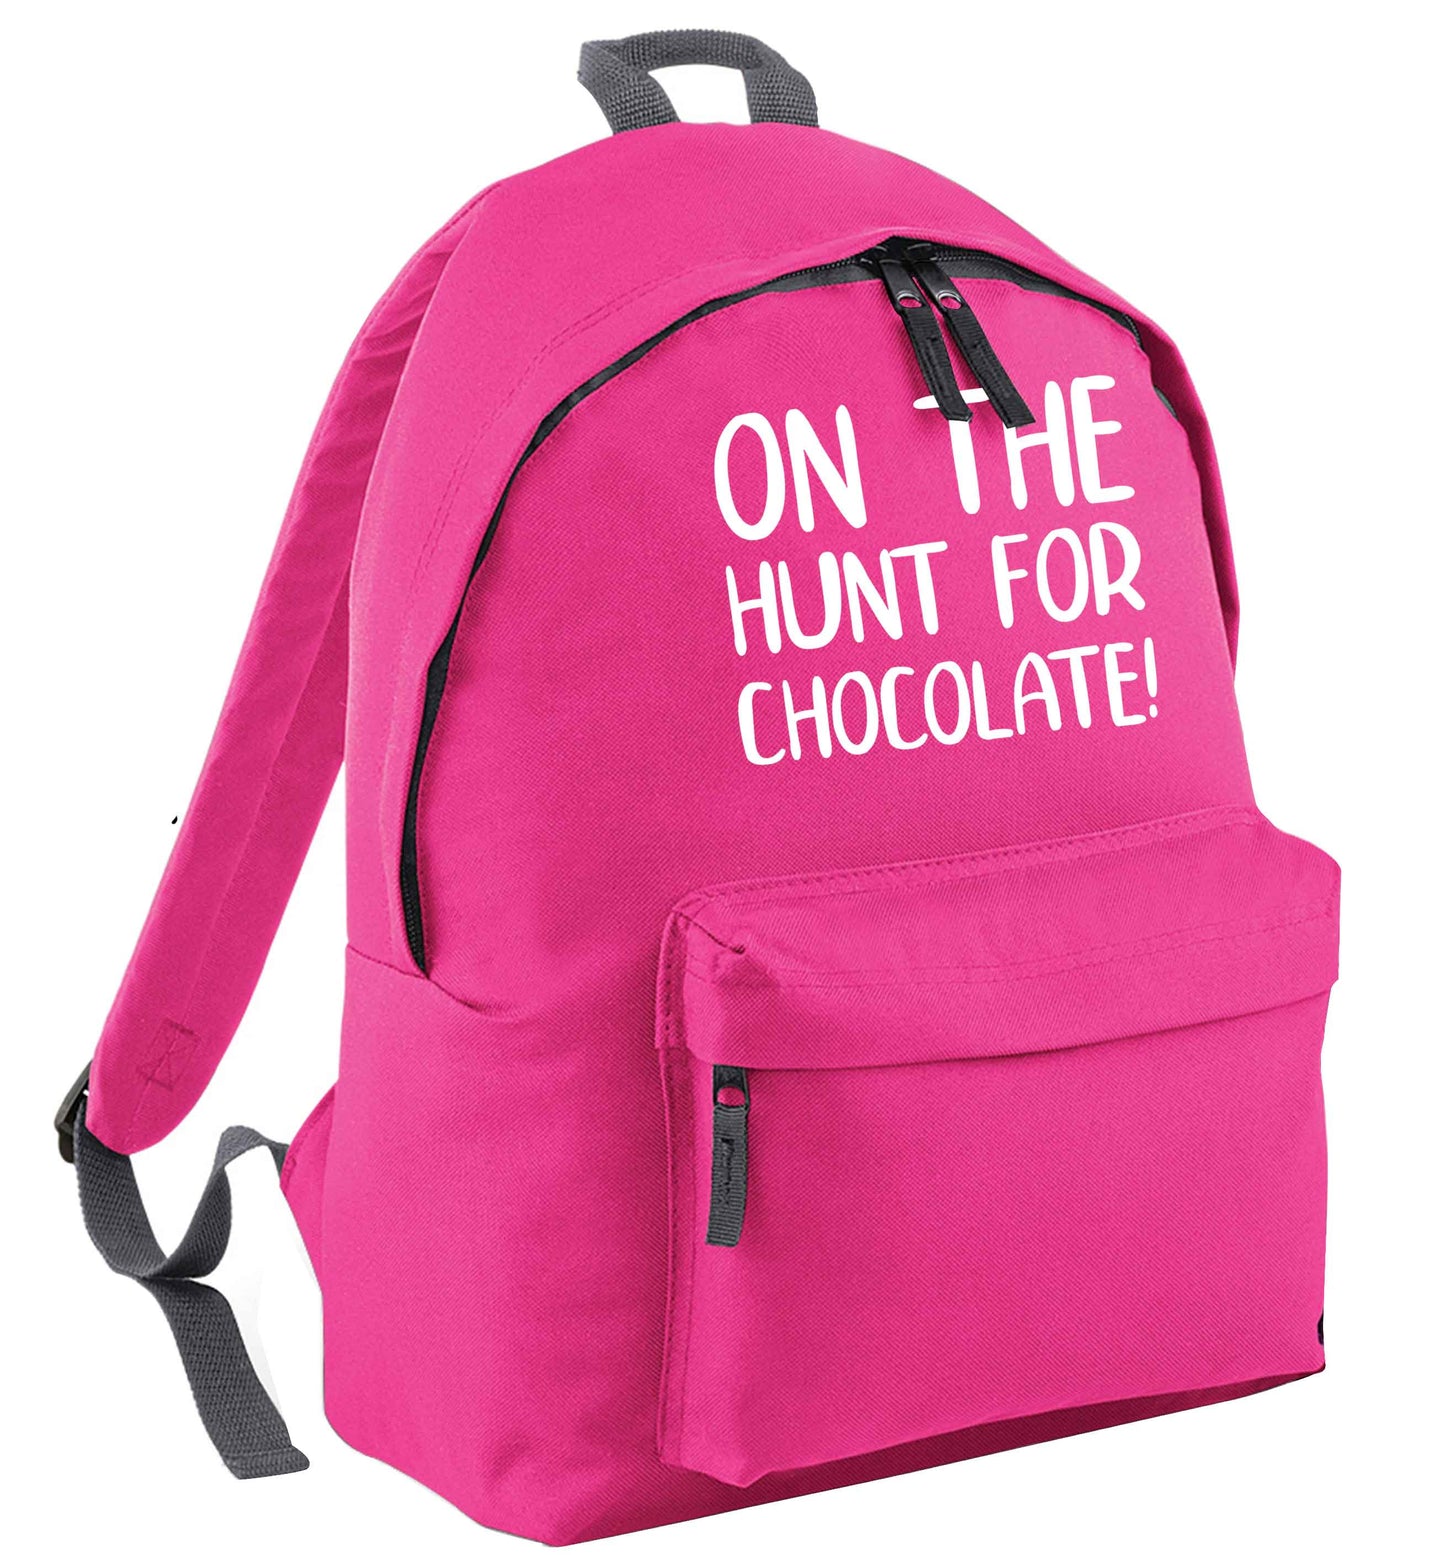 On the hunt for chocolate! pink adults backpack